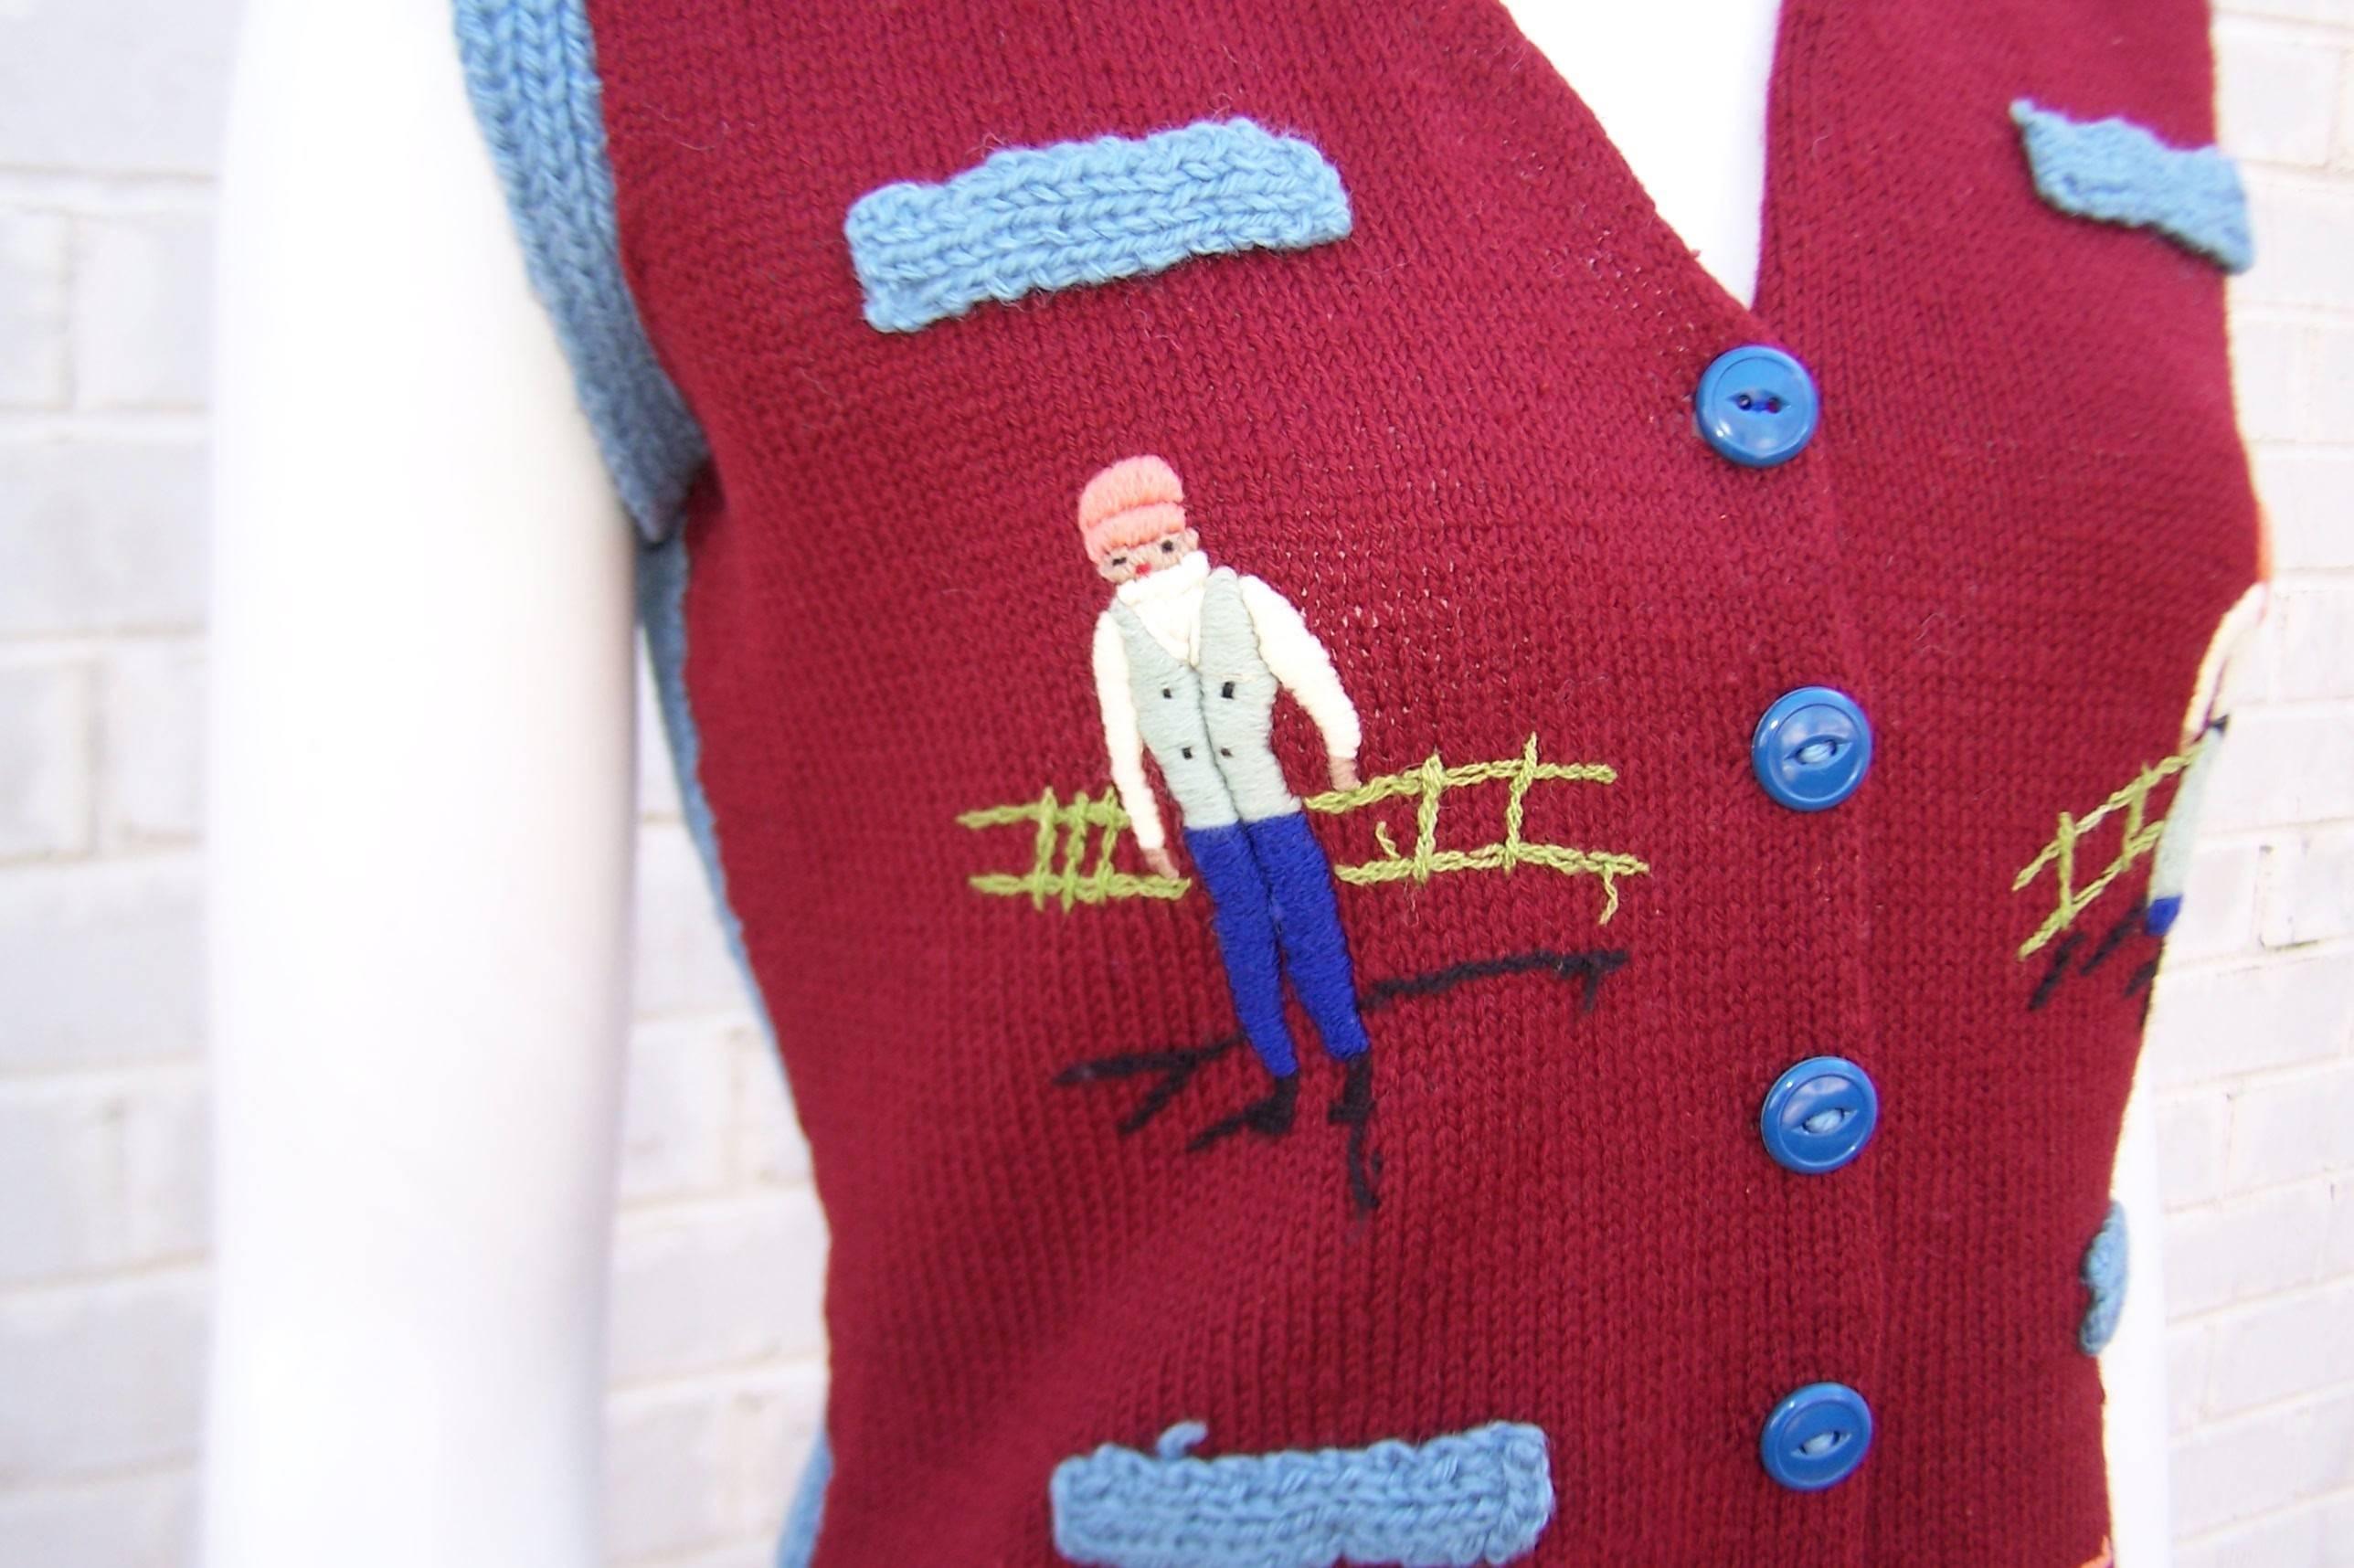 This C.1970 hand knit sweater vest is decorated with charming imagery .  The vest is styled like a menswear waistcoat with buttons at the front and faux pockets.  It is a burgundy red at the front and baby blue at the back with folk art depictions